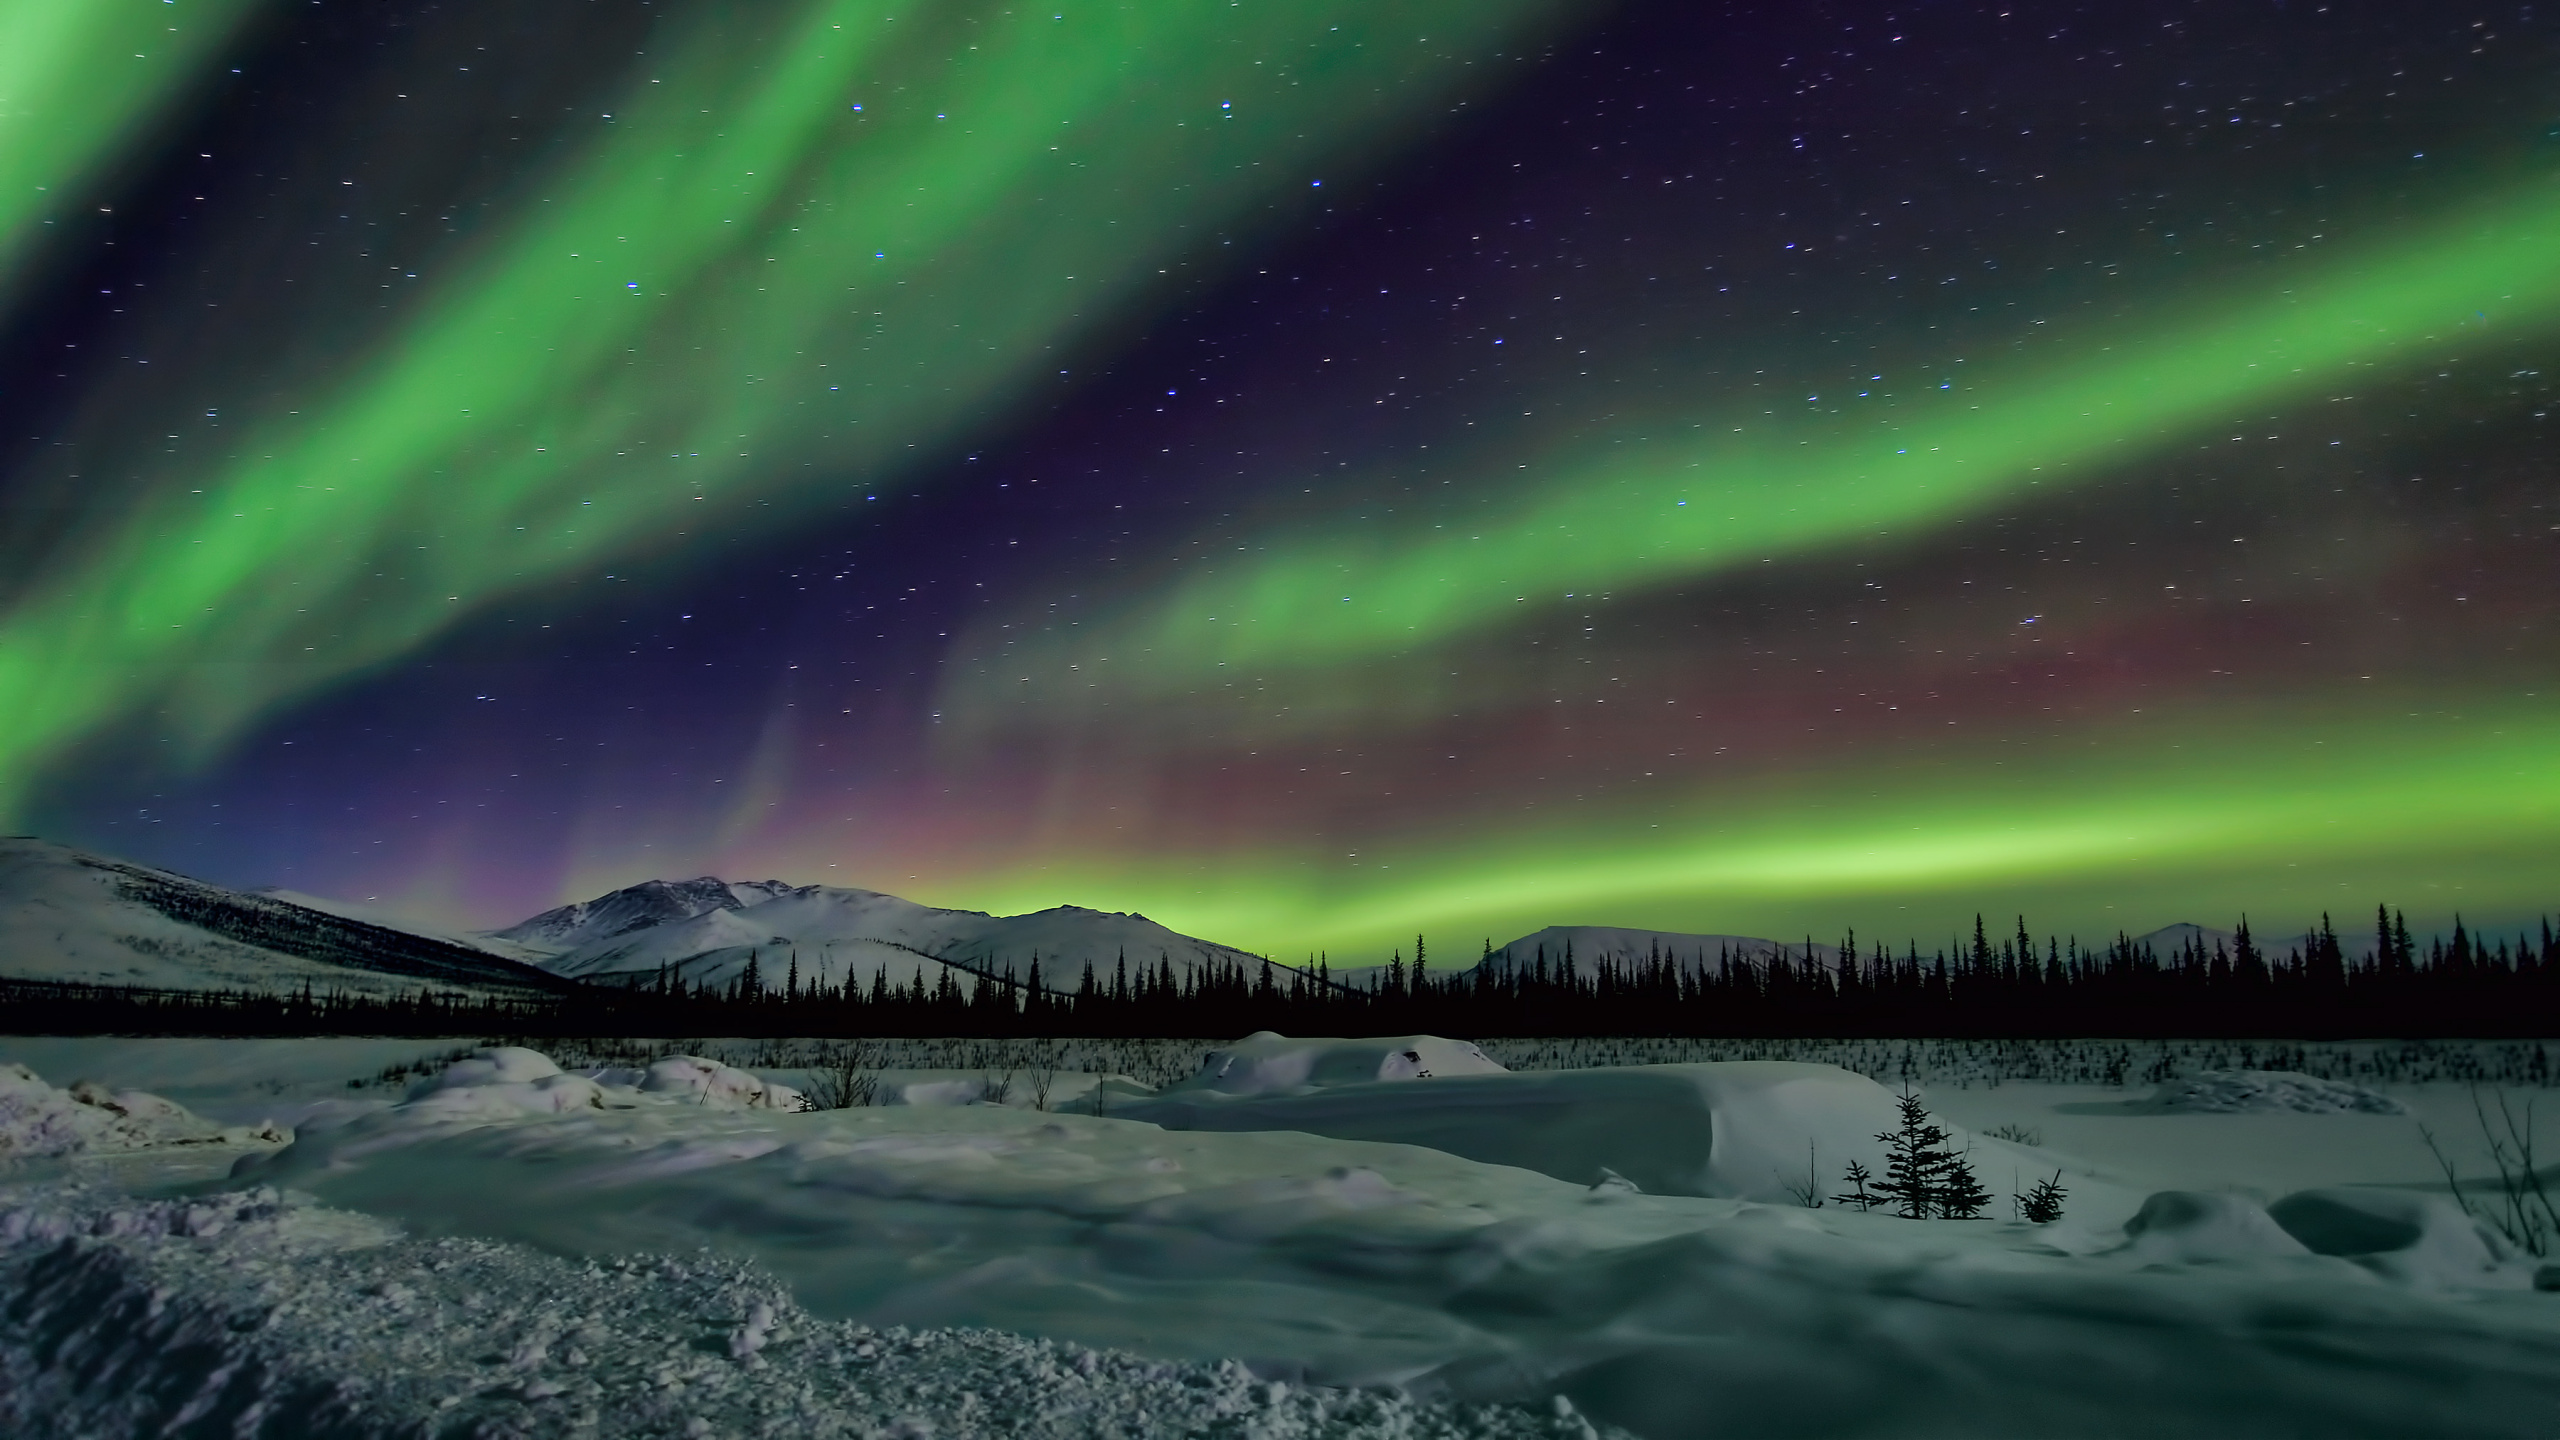 Green Aurora Lights Over Snow Covered Ground During Night Time. Wallpaper in 2560x1440 Resolution